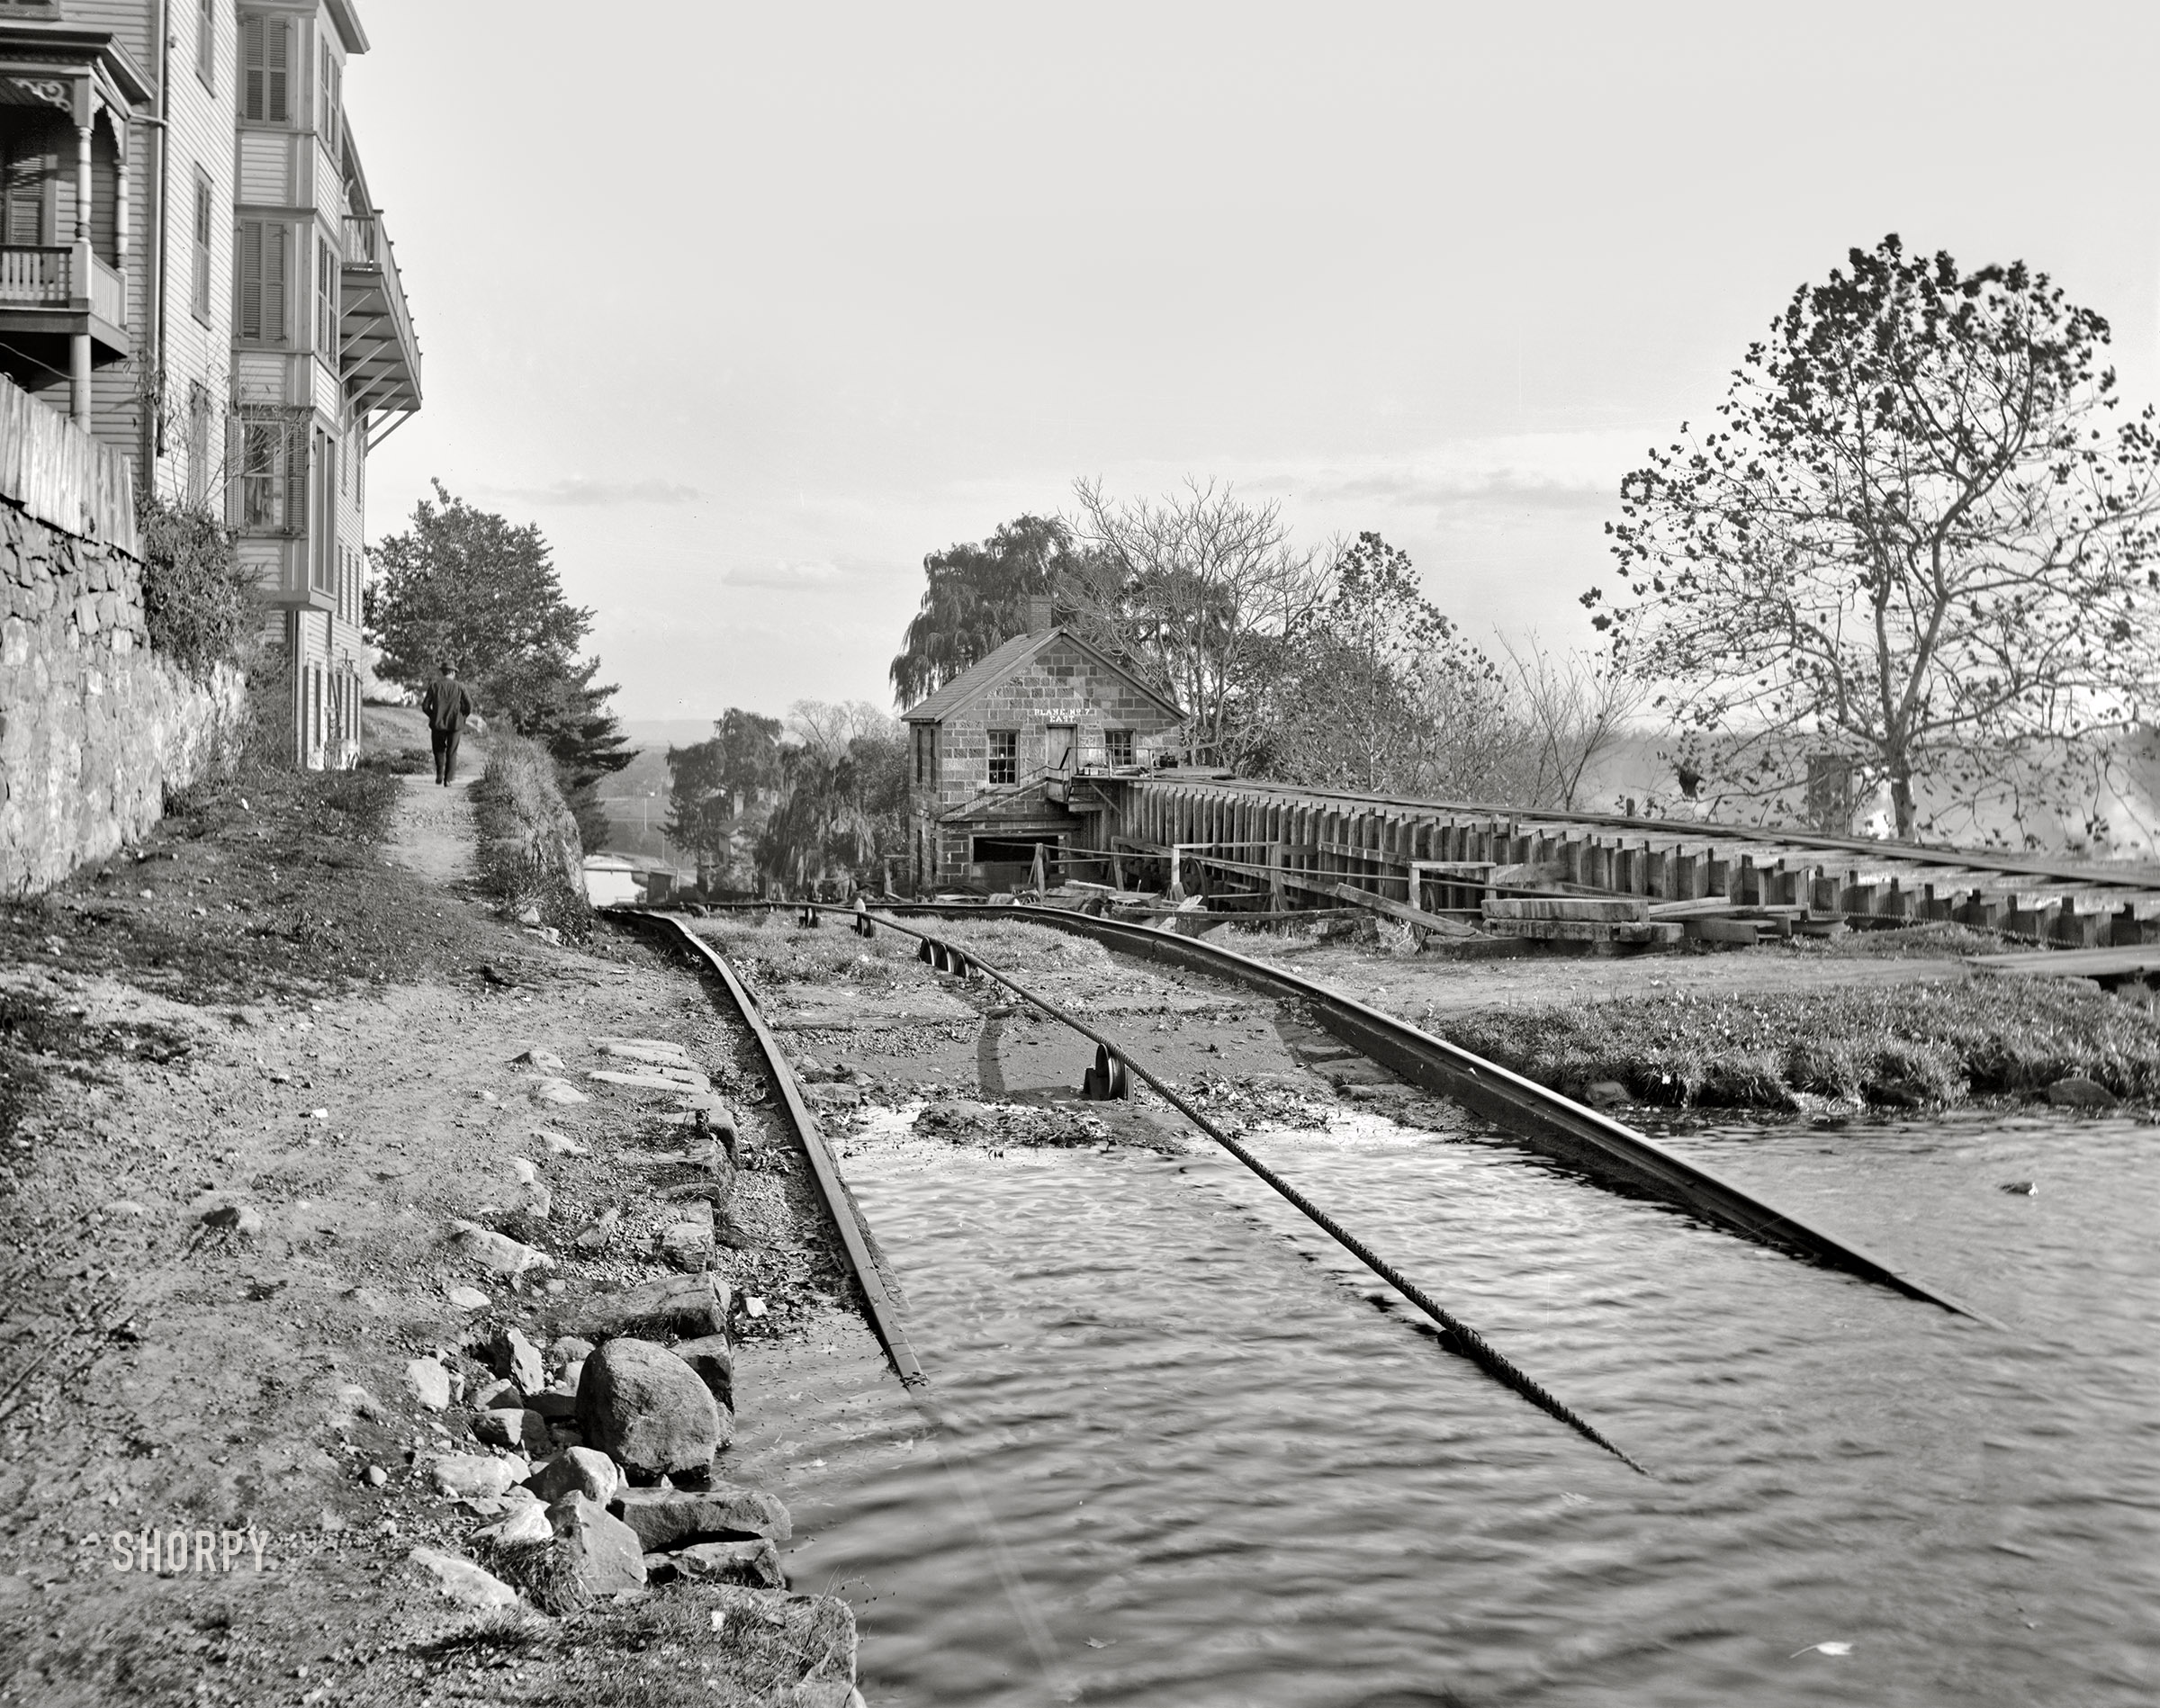 Boonton, New Jersey, circa 1900. "Top of plane, Morris and Essex Canal." 8x10 inch dry plate glass negative, Detroit Photographic Company. View full size.